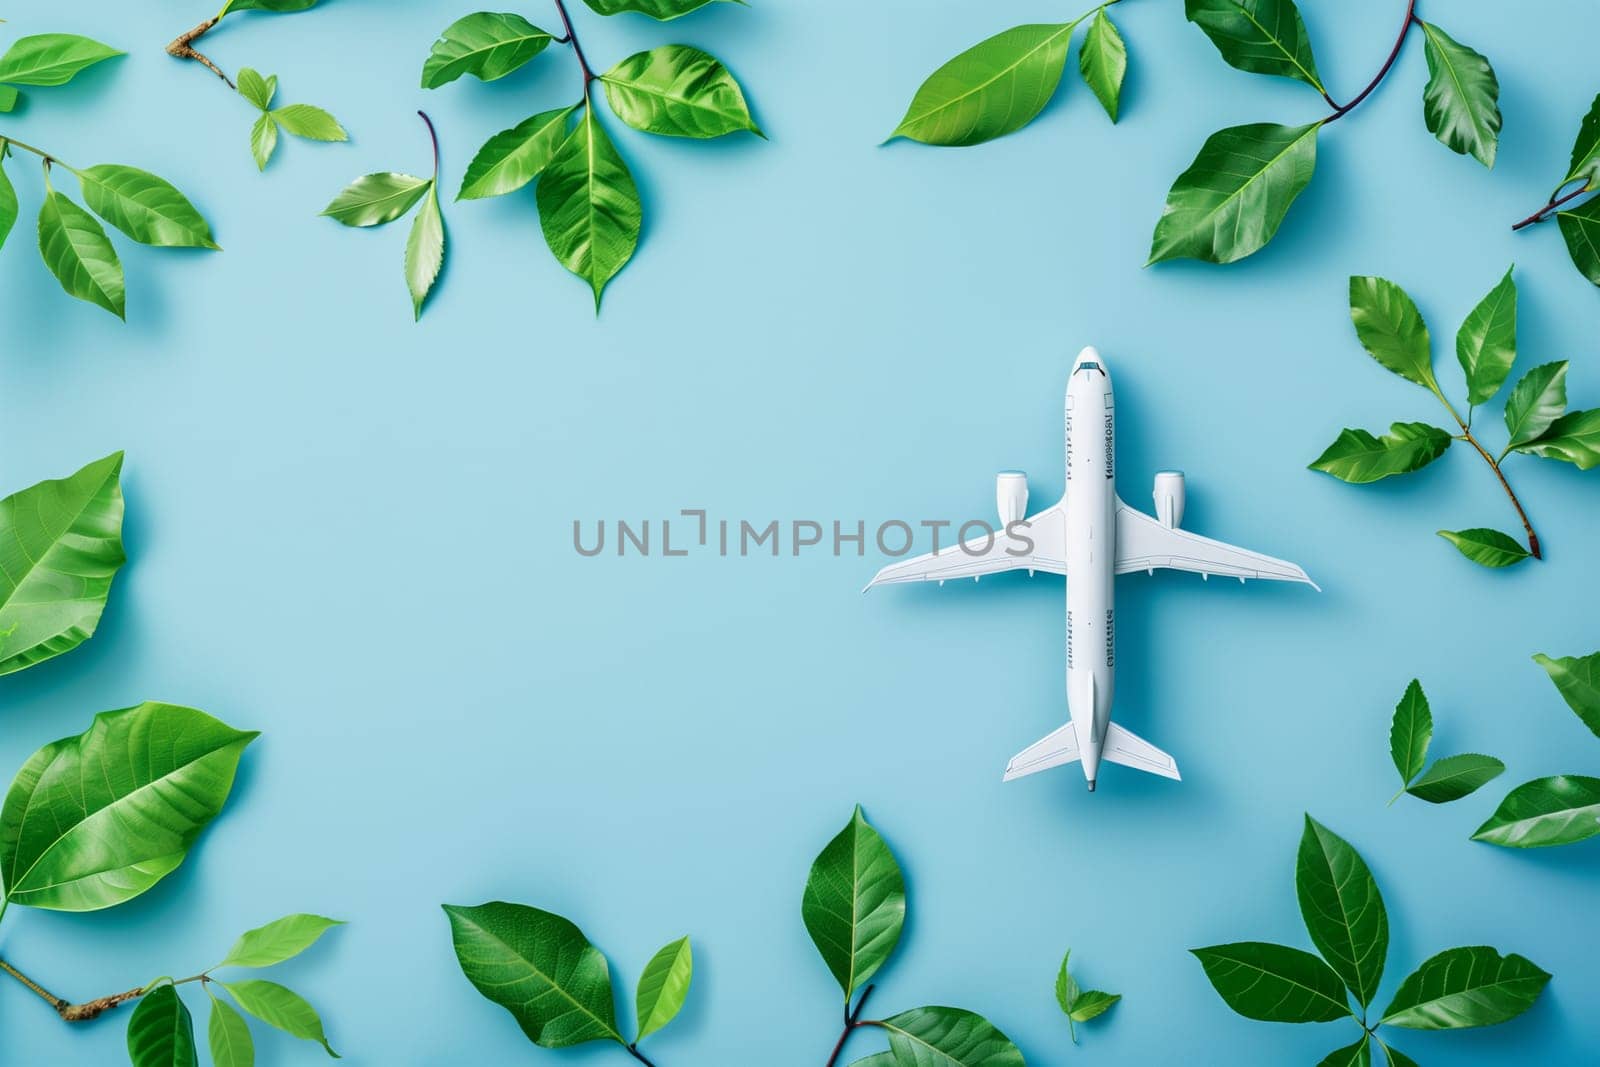 White Model Airplane Surrounded by Green Leaves on a Blue Background by Sd28DimoN_1976